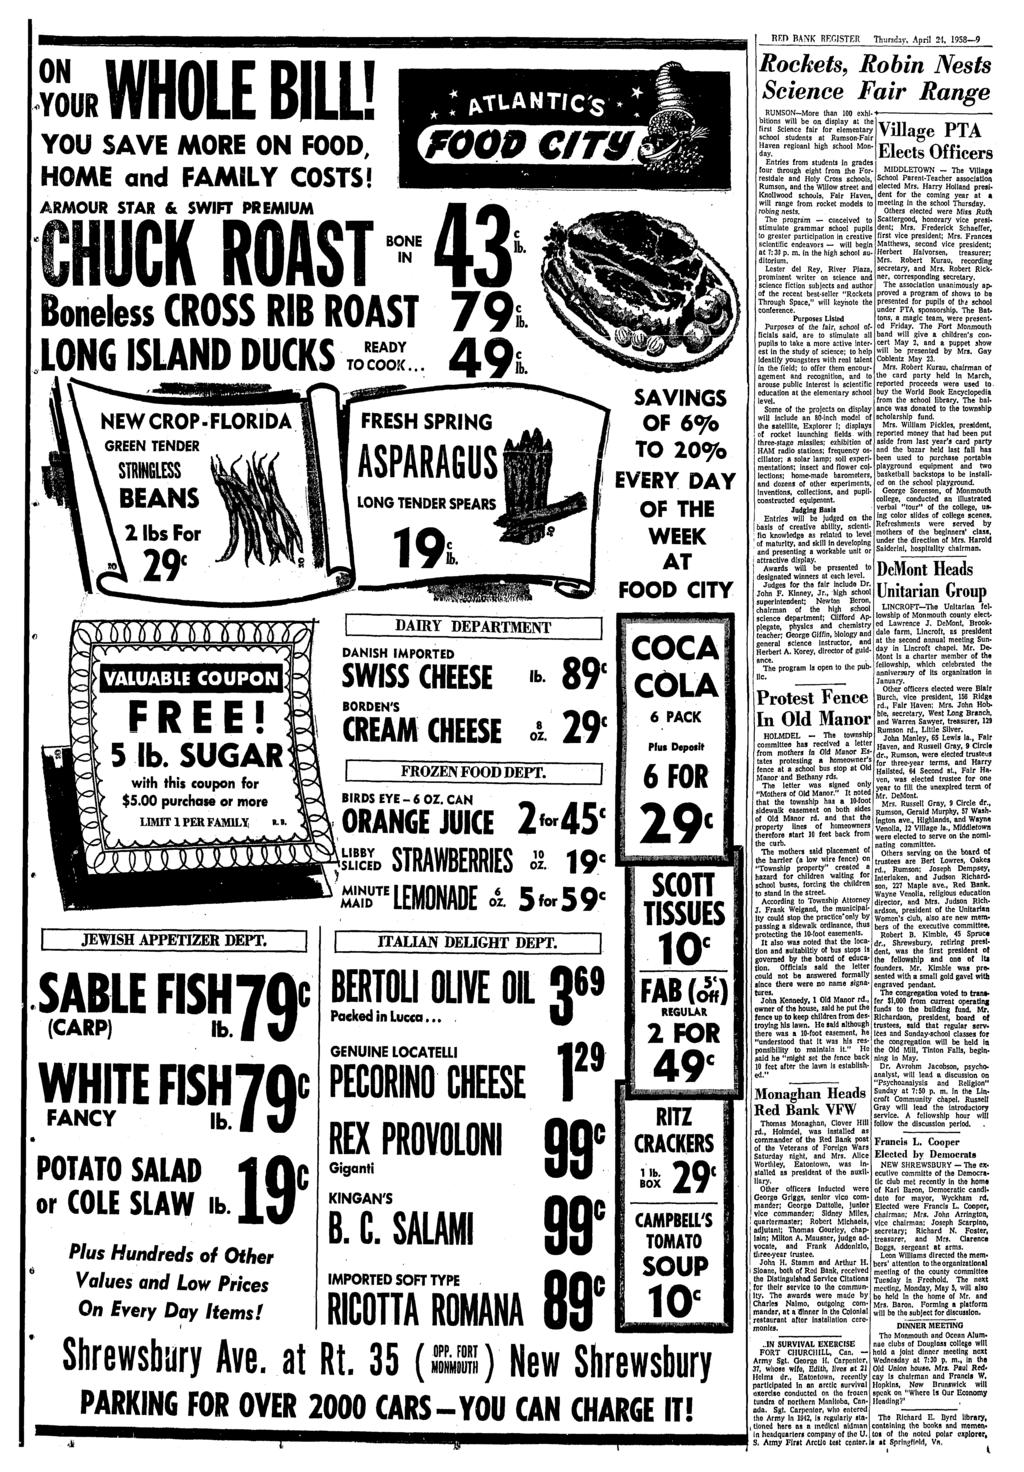 WHOLE BILL! YOU SAVE MORE ON FOOD, HOME and FAMILY COSTS! ARMOUR STAR & SWIFT PREMIUM Boneless CROSS RIB ROAST 7 9 LONG ISLAND DUCKS READY TO COOK.